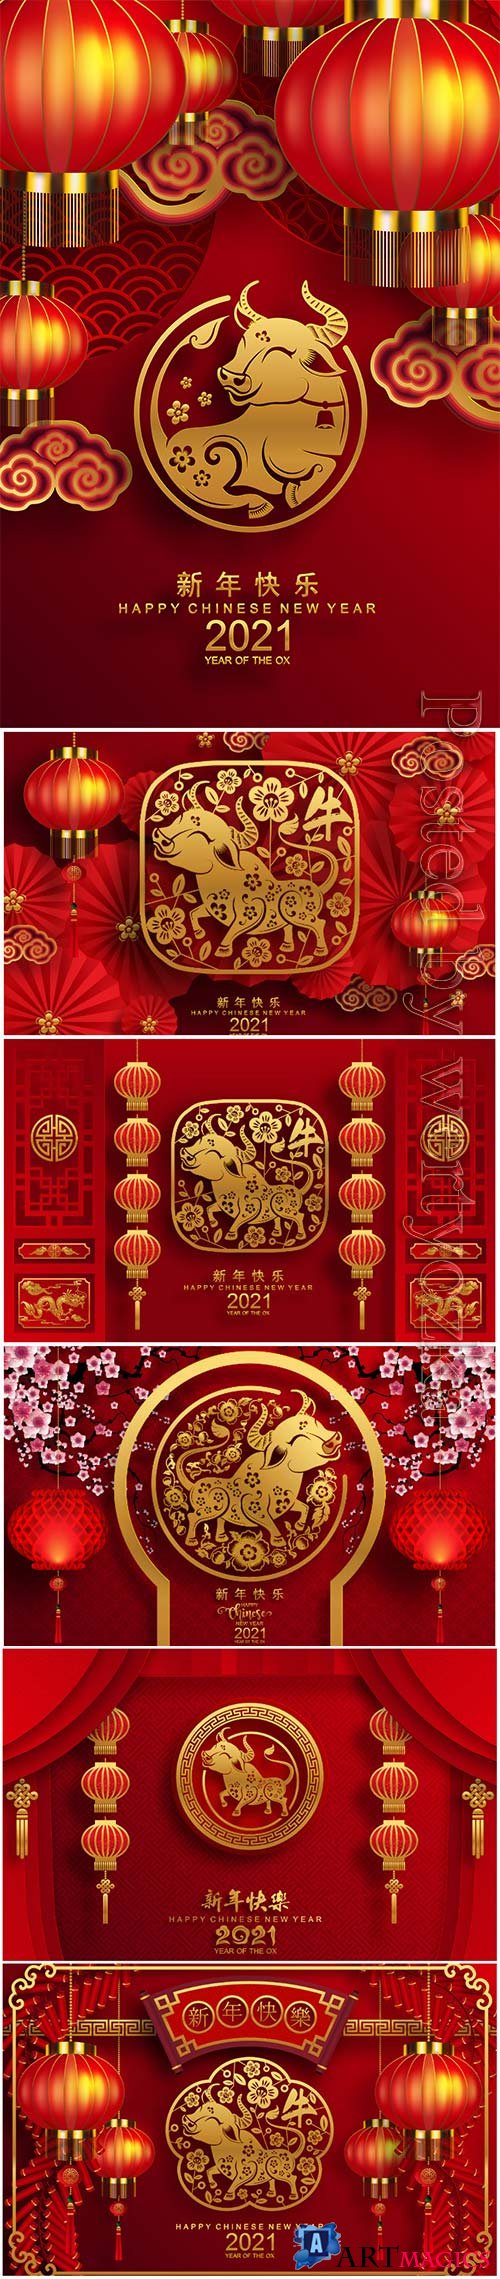 2021 Chinese new year greeting vector card